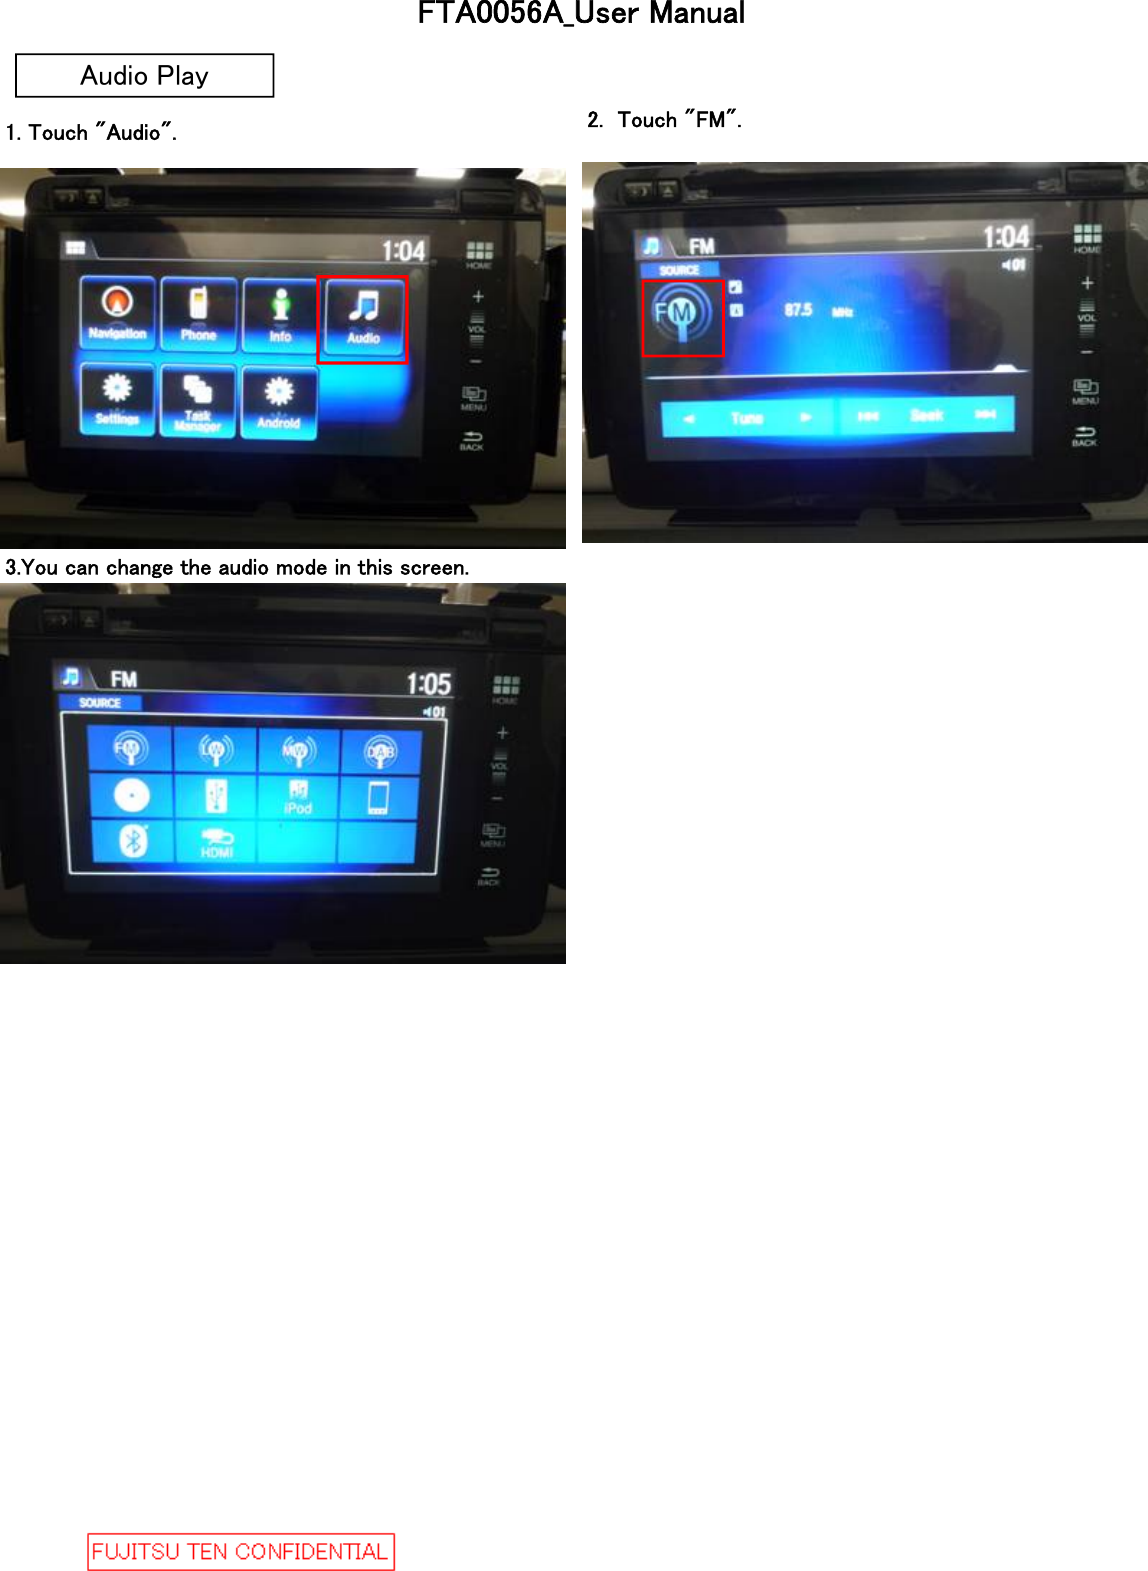 1. Touch &quot;Audio&quot;. 2.  Touch &quot;FM&quot;.3.You can change the audio mode in this screen.FTA0056A_User ManualAudio Play